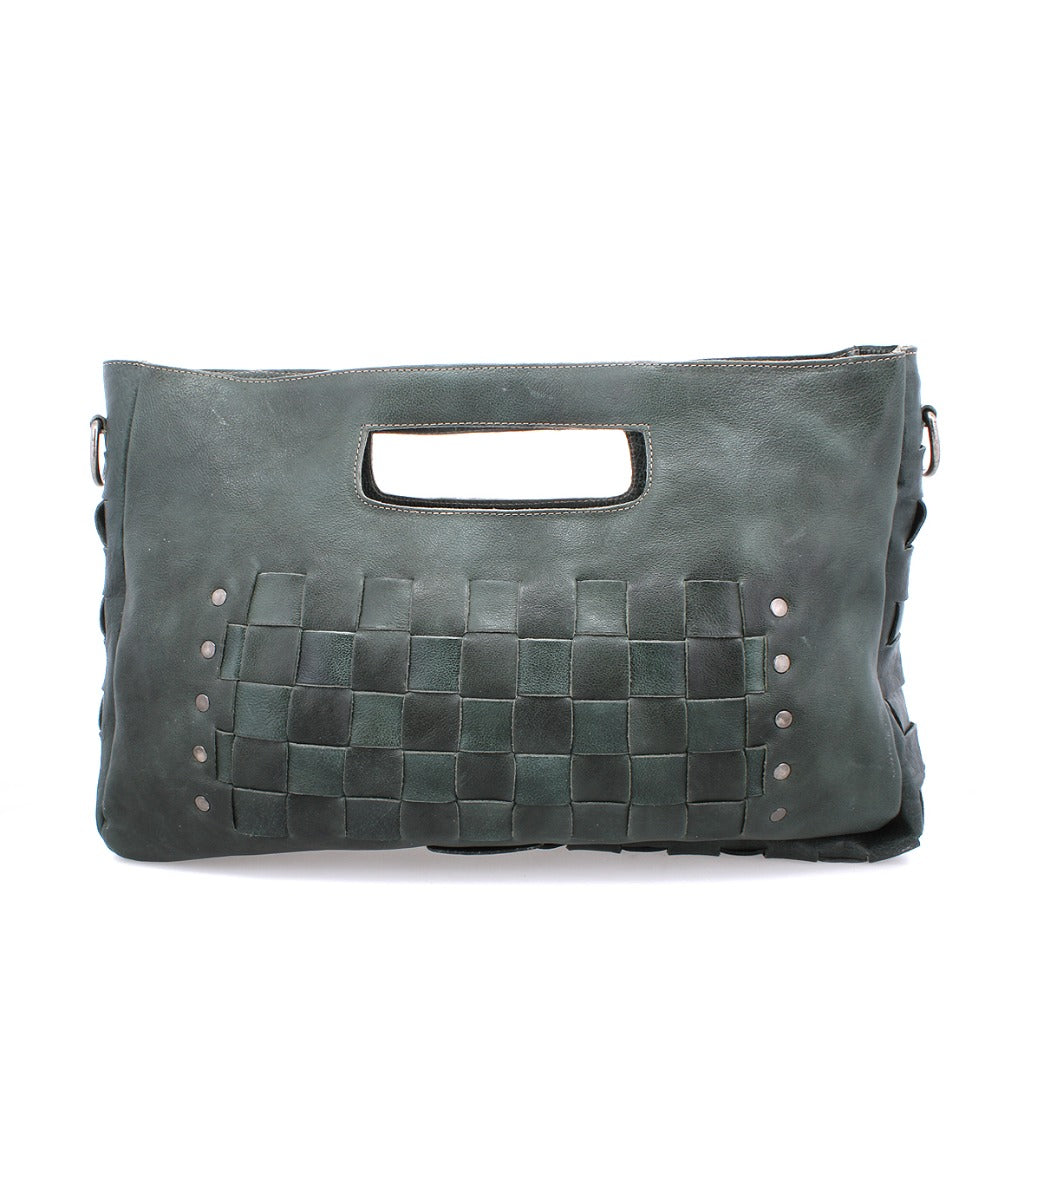 A green leather clutch bag with studded details, called the Orchid L by Bed Stu.